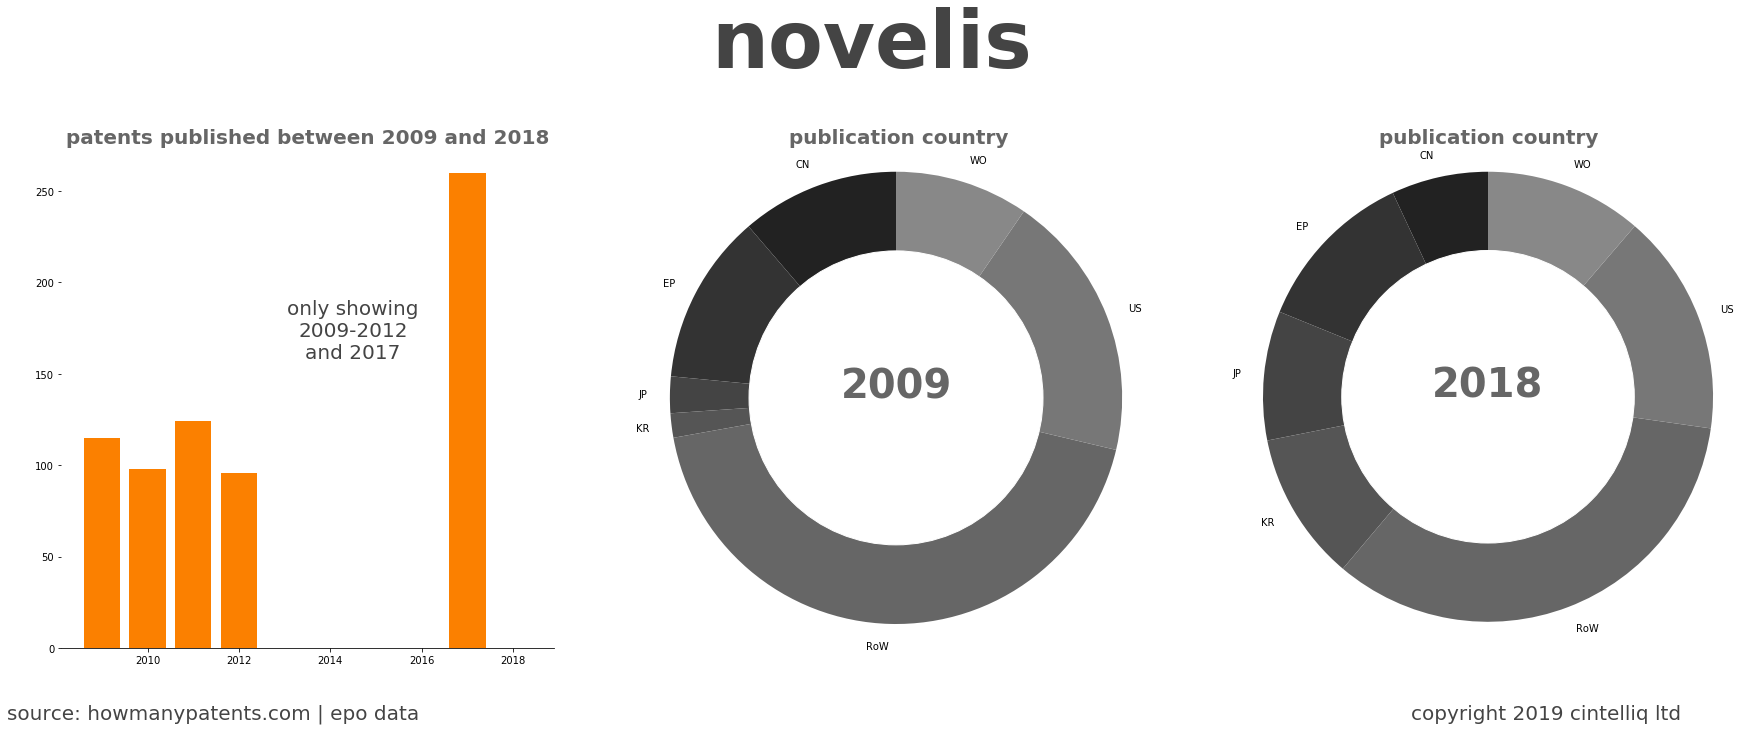 summary of patents for Novelis